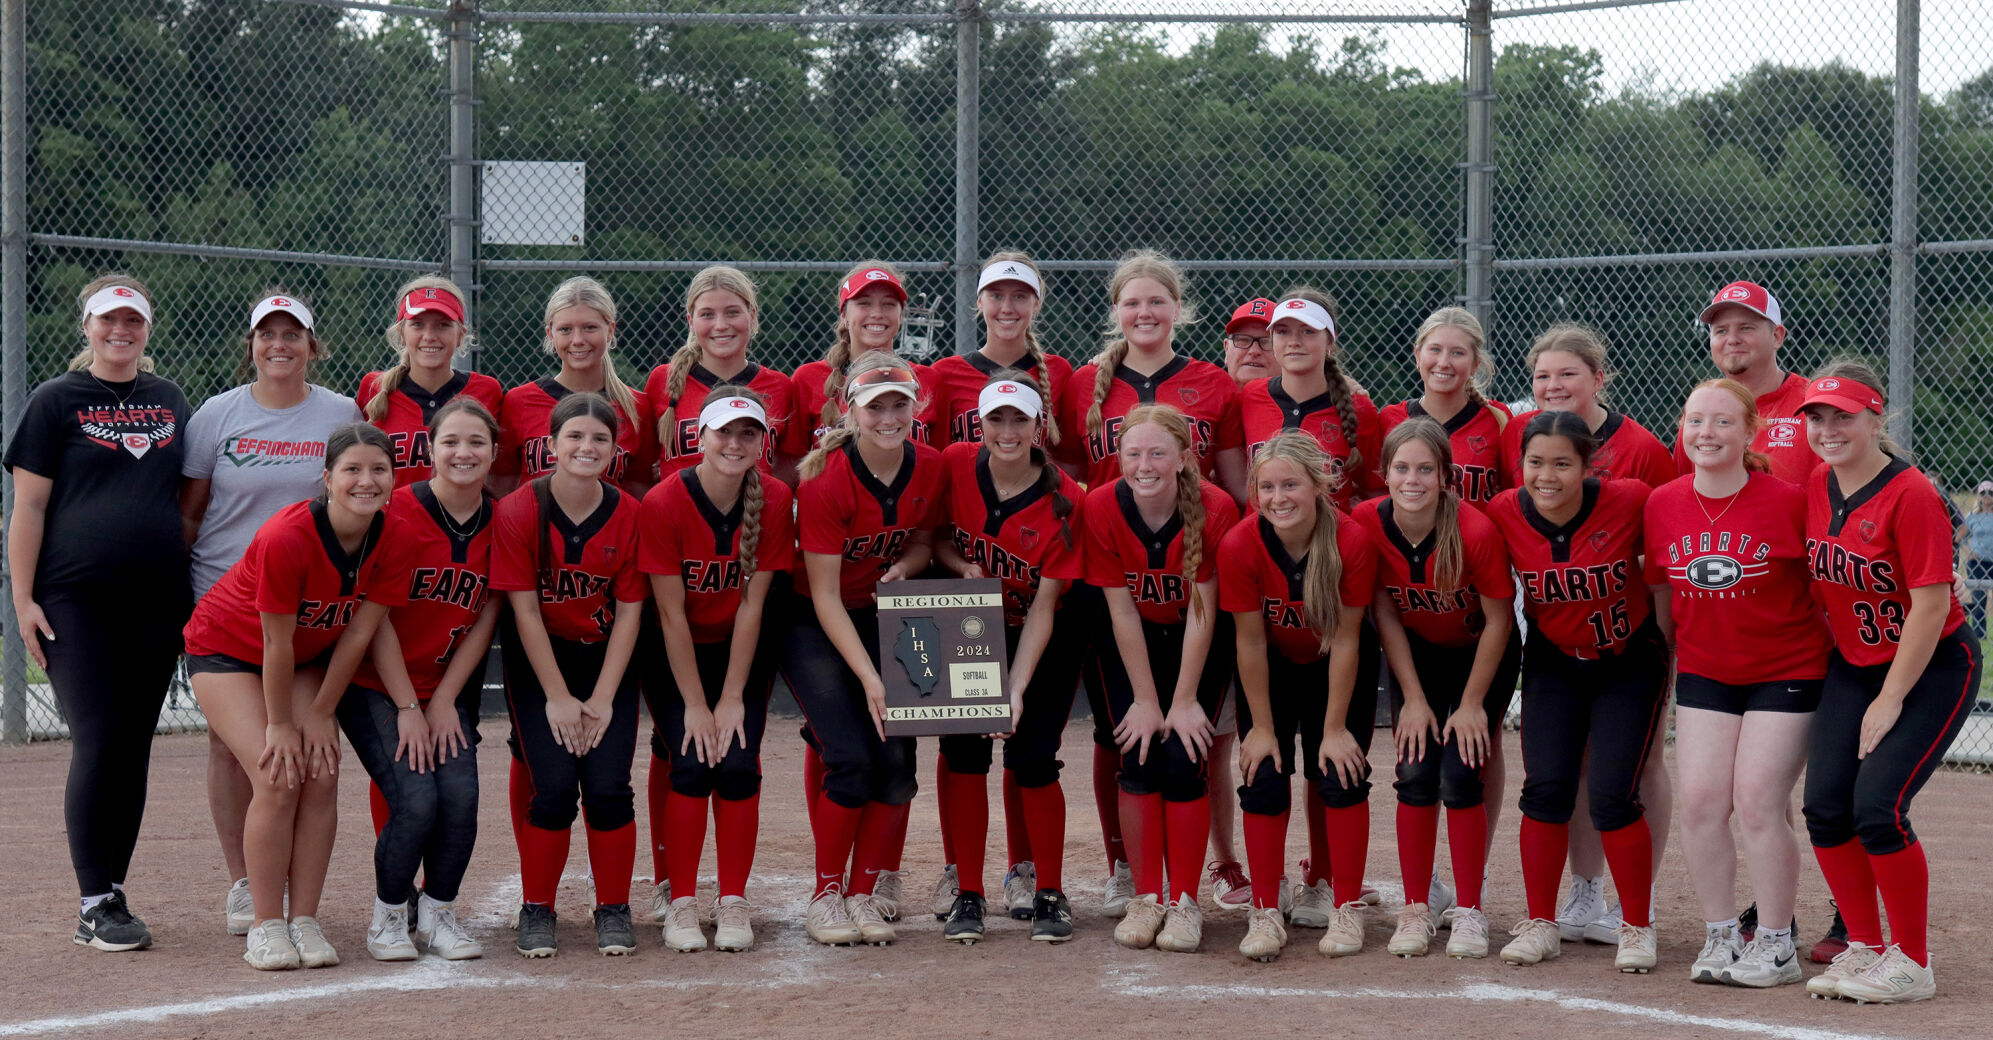 Effingham Softball Team Clinches Regional Championship After 5 Years with Strong Defensive Play and Multi-Run Lead